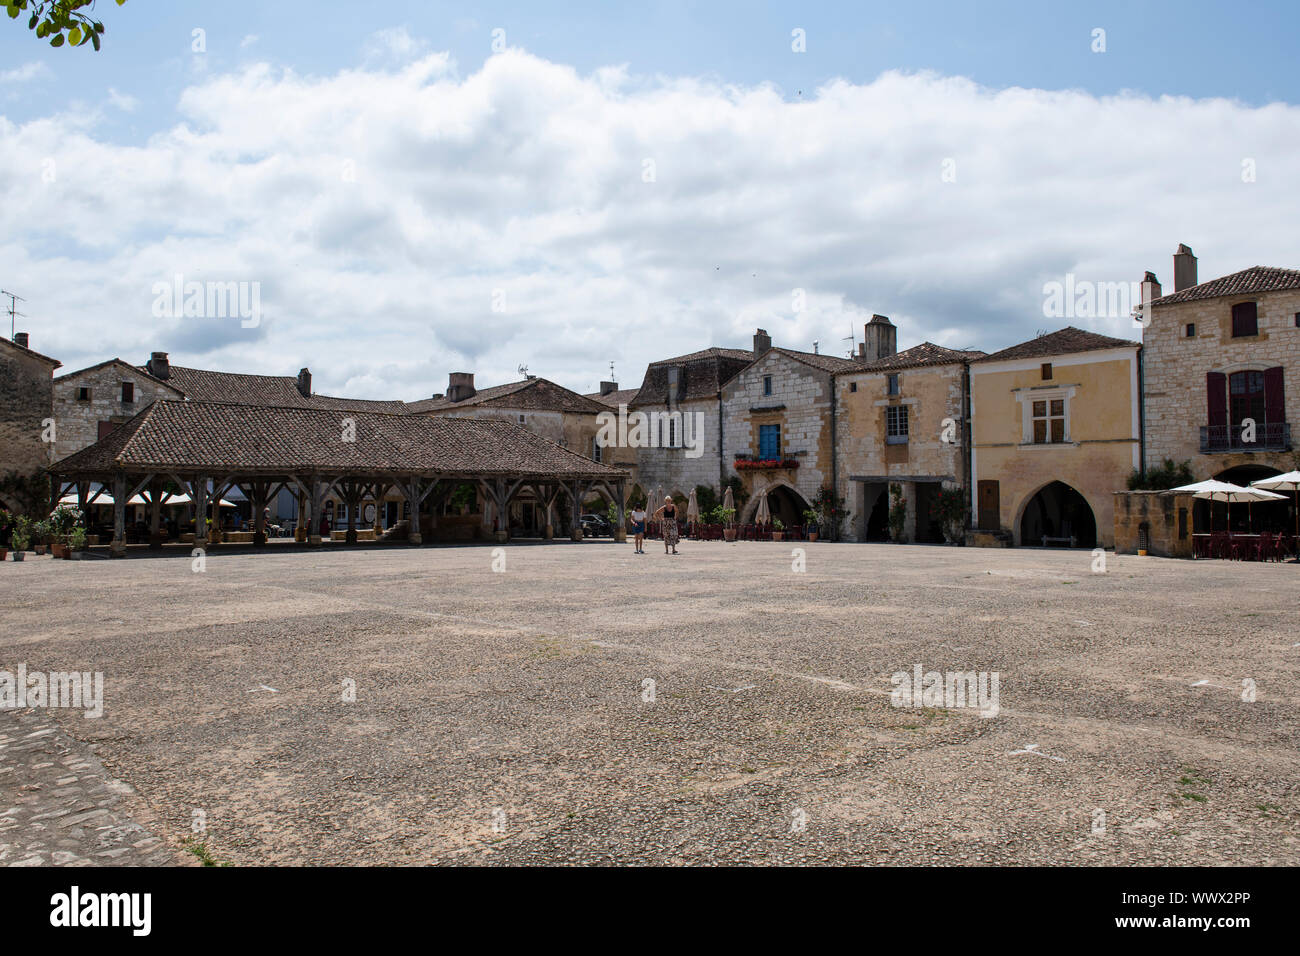 Wide shot of the Main Square of Monpazier in the Dordogne region of France Stock Photo